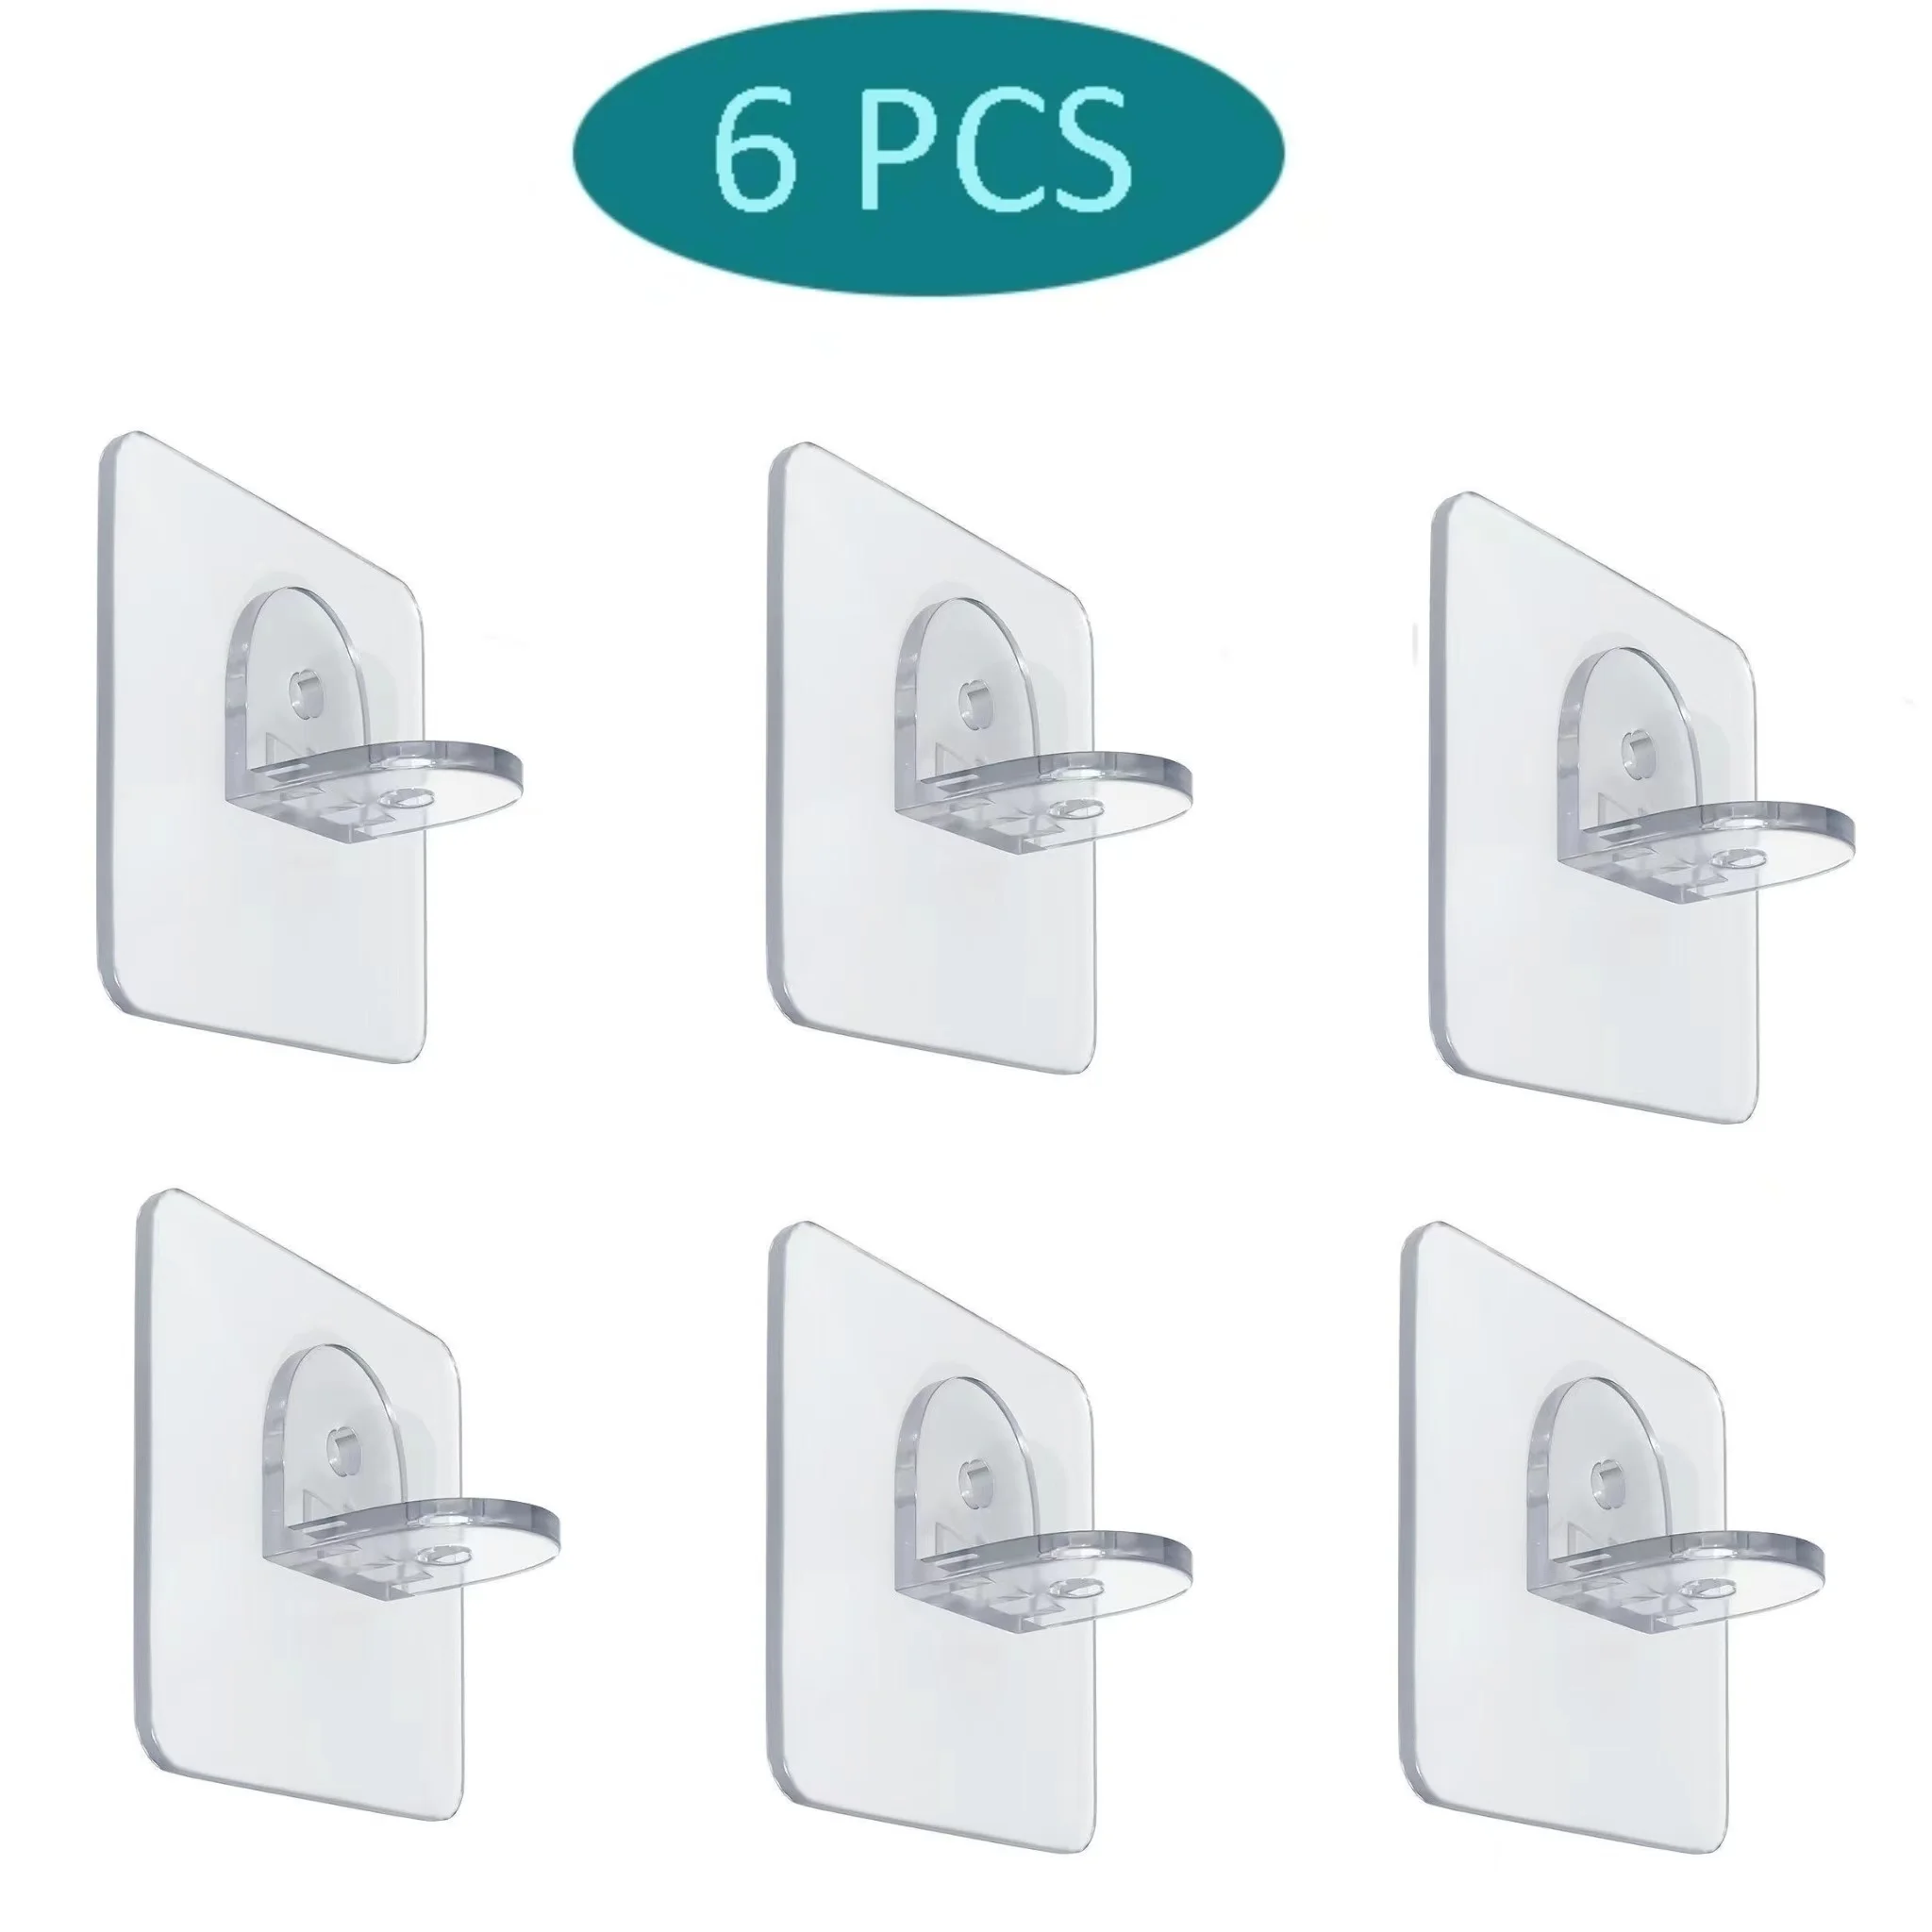 10 Pcs Adhesive Shelf Support Pegs (50% Off) - Inspire Uplift